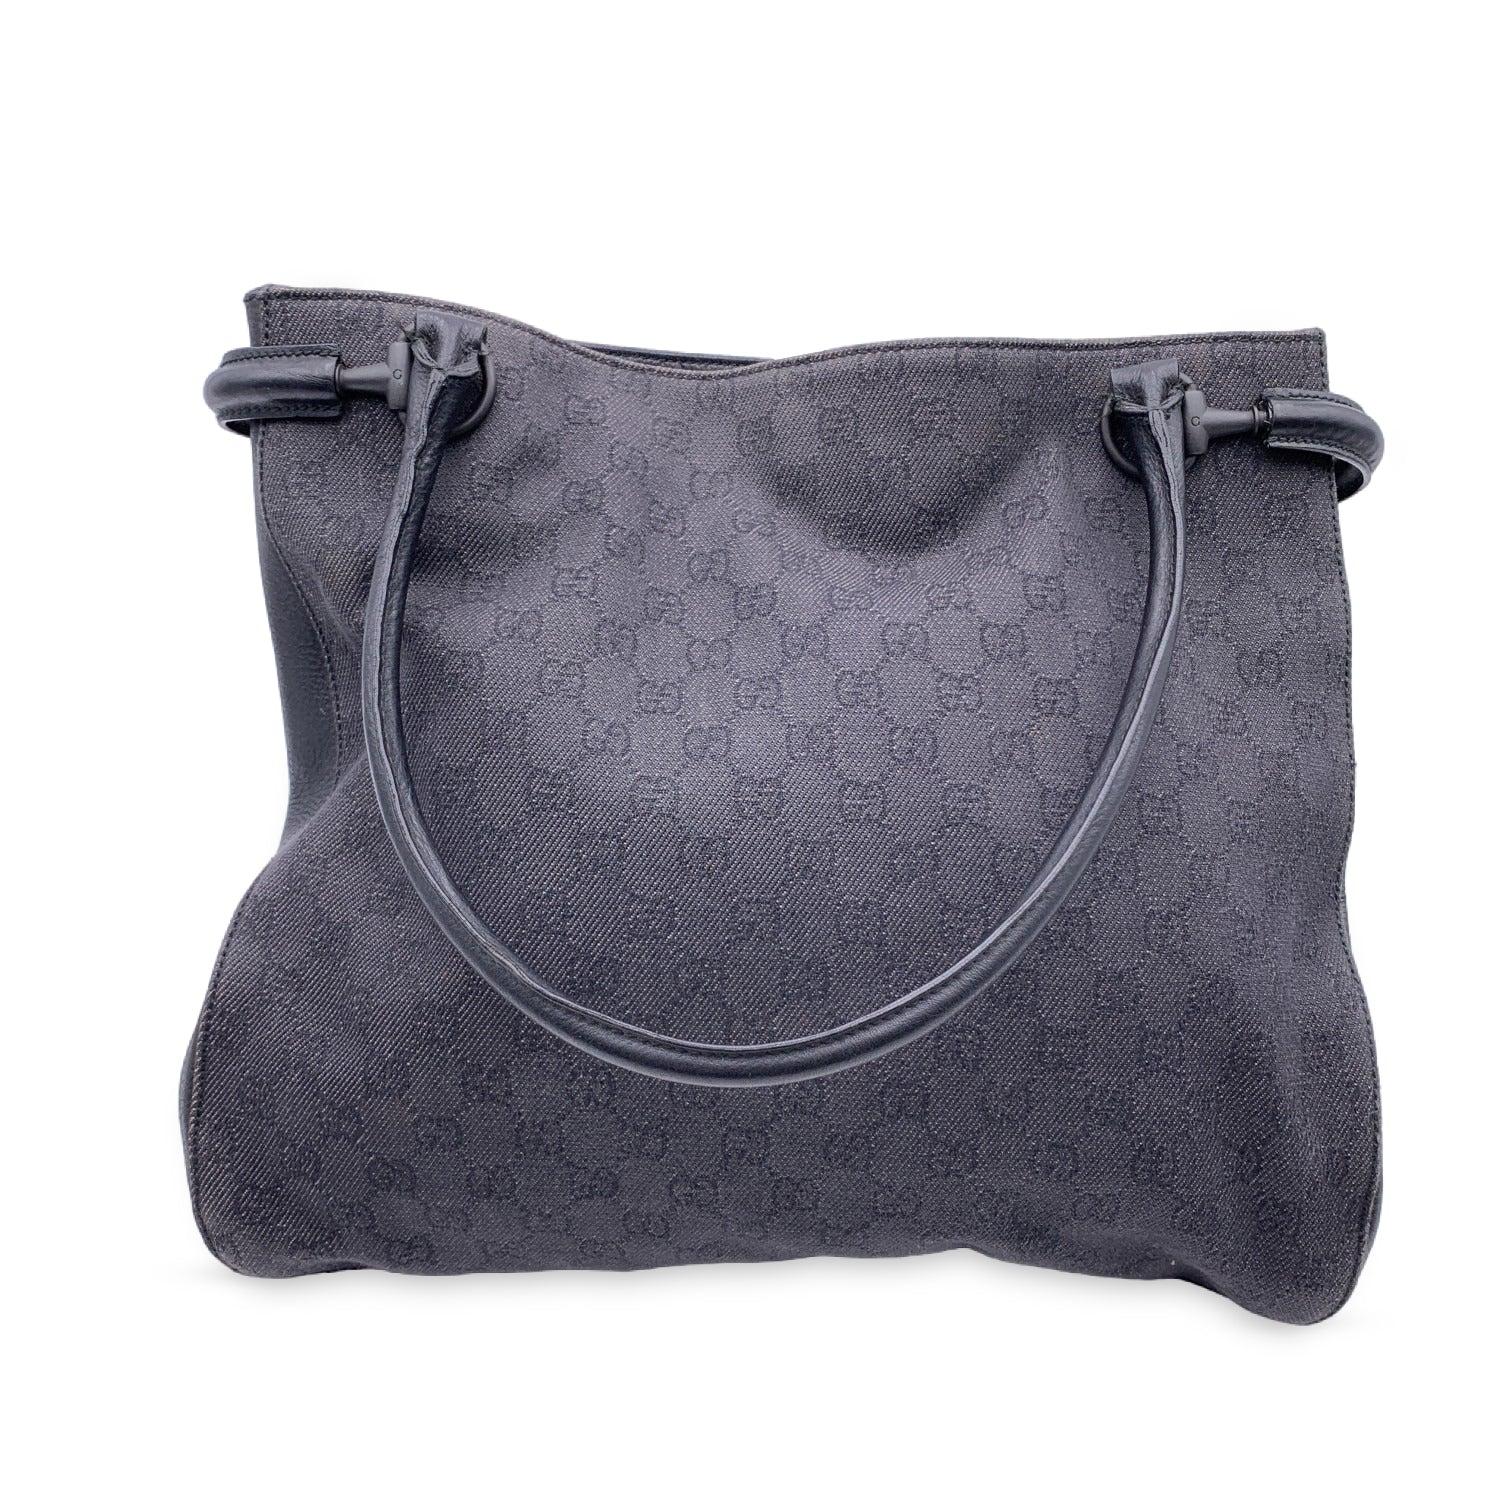 Gucci Black Denim Canvas Shoulder Bag Shopping Tote In Excellent Condition For Sale In Rome, Rome